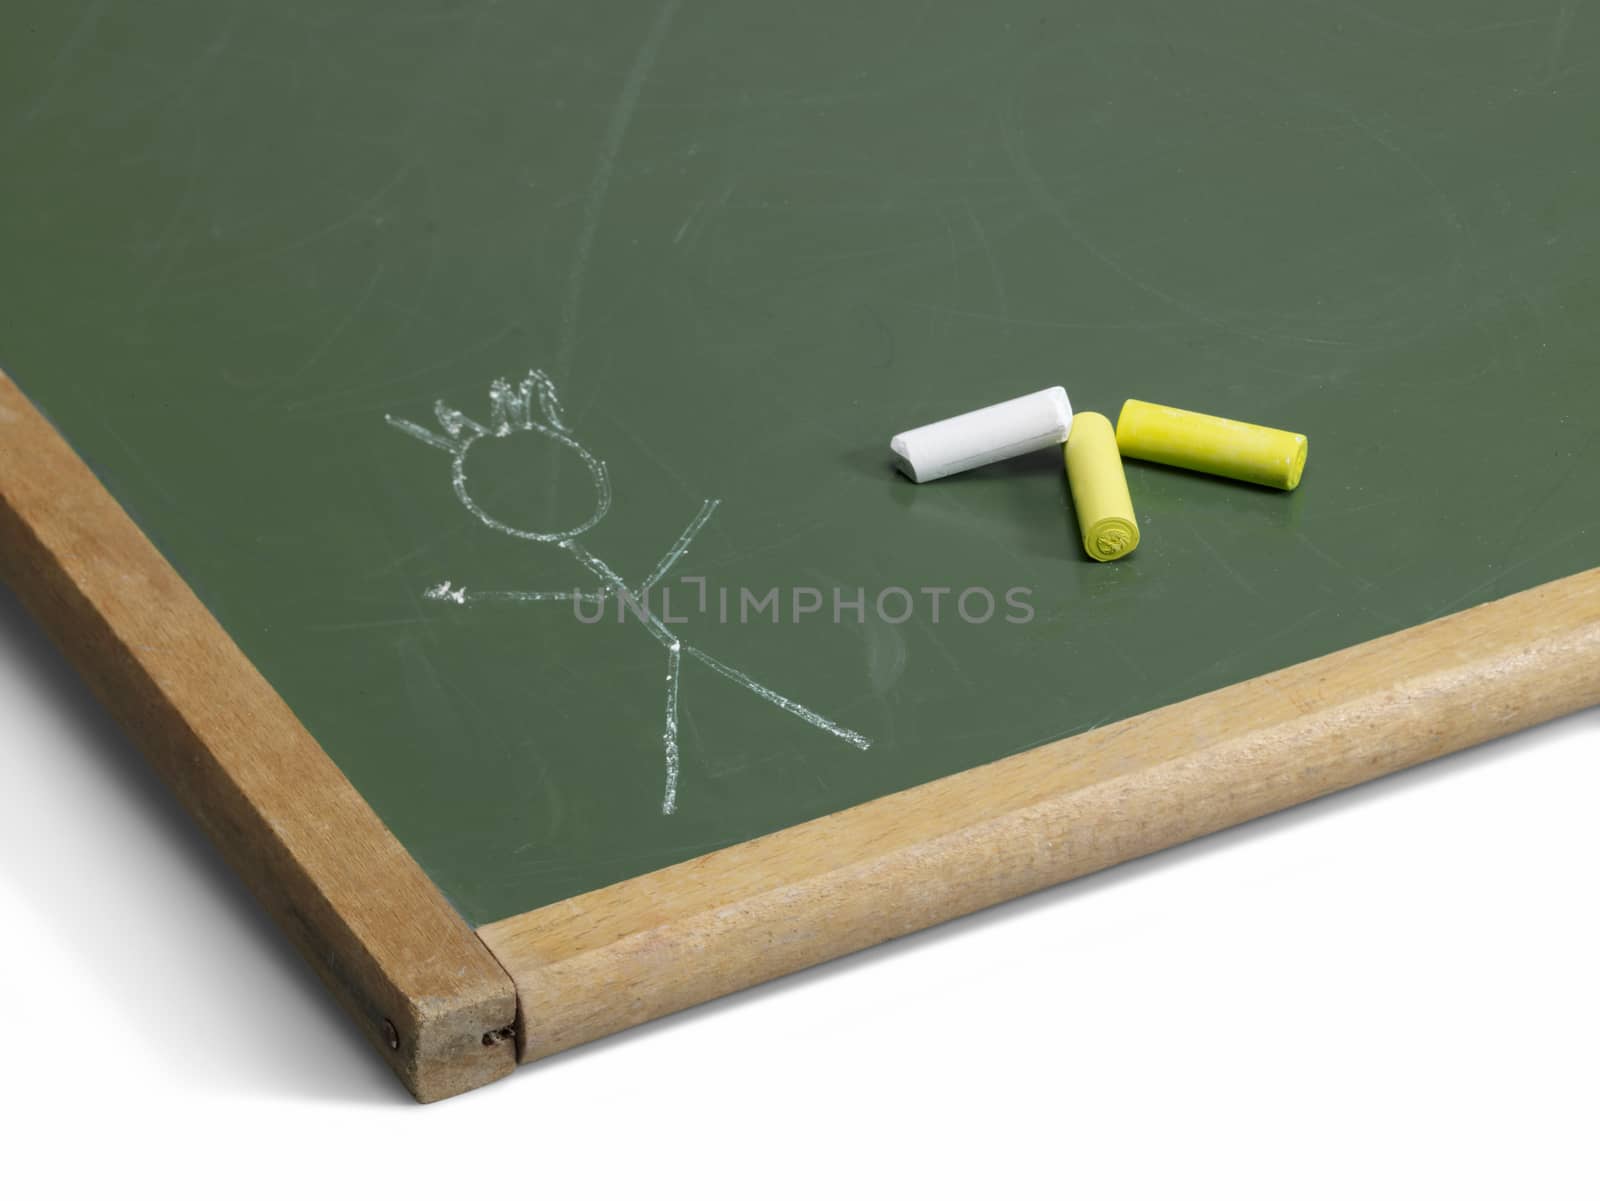 edge of a old used blackboard on the ground with crayon-painted stick man and crayons on it. Studio shot in white back with shadow